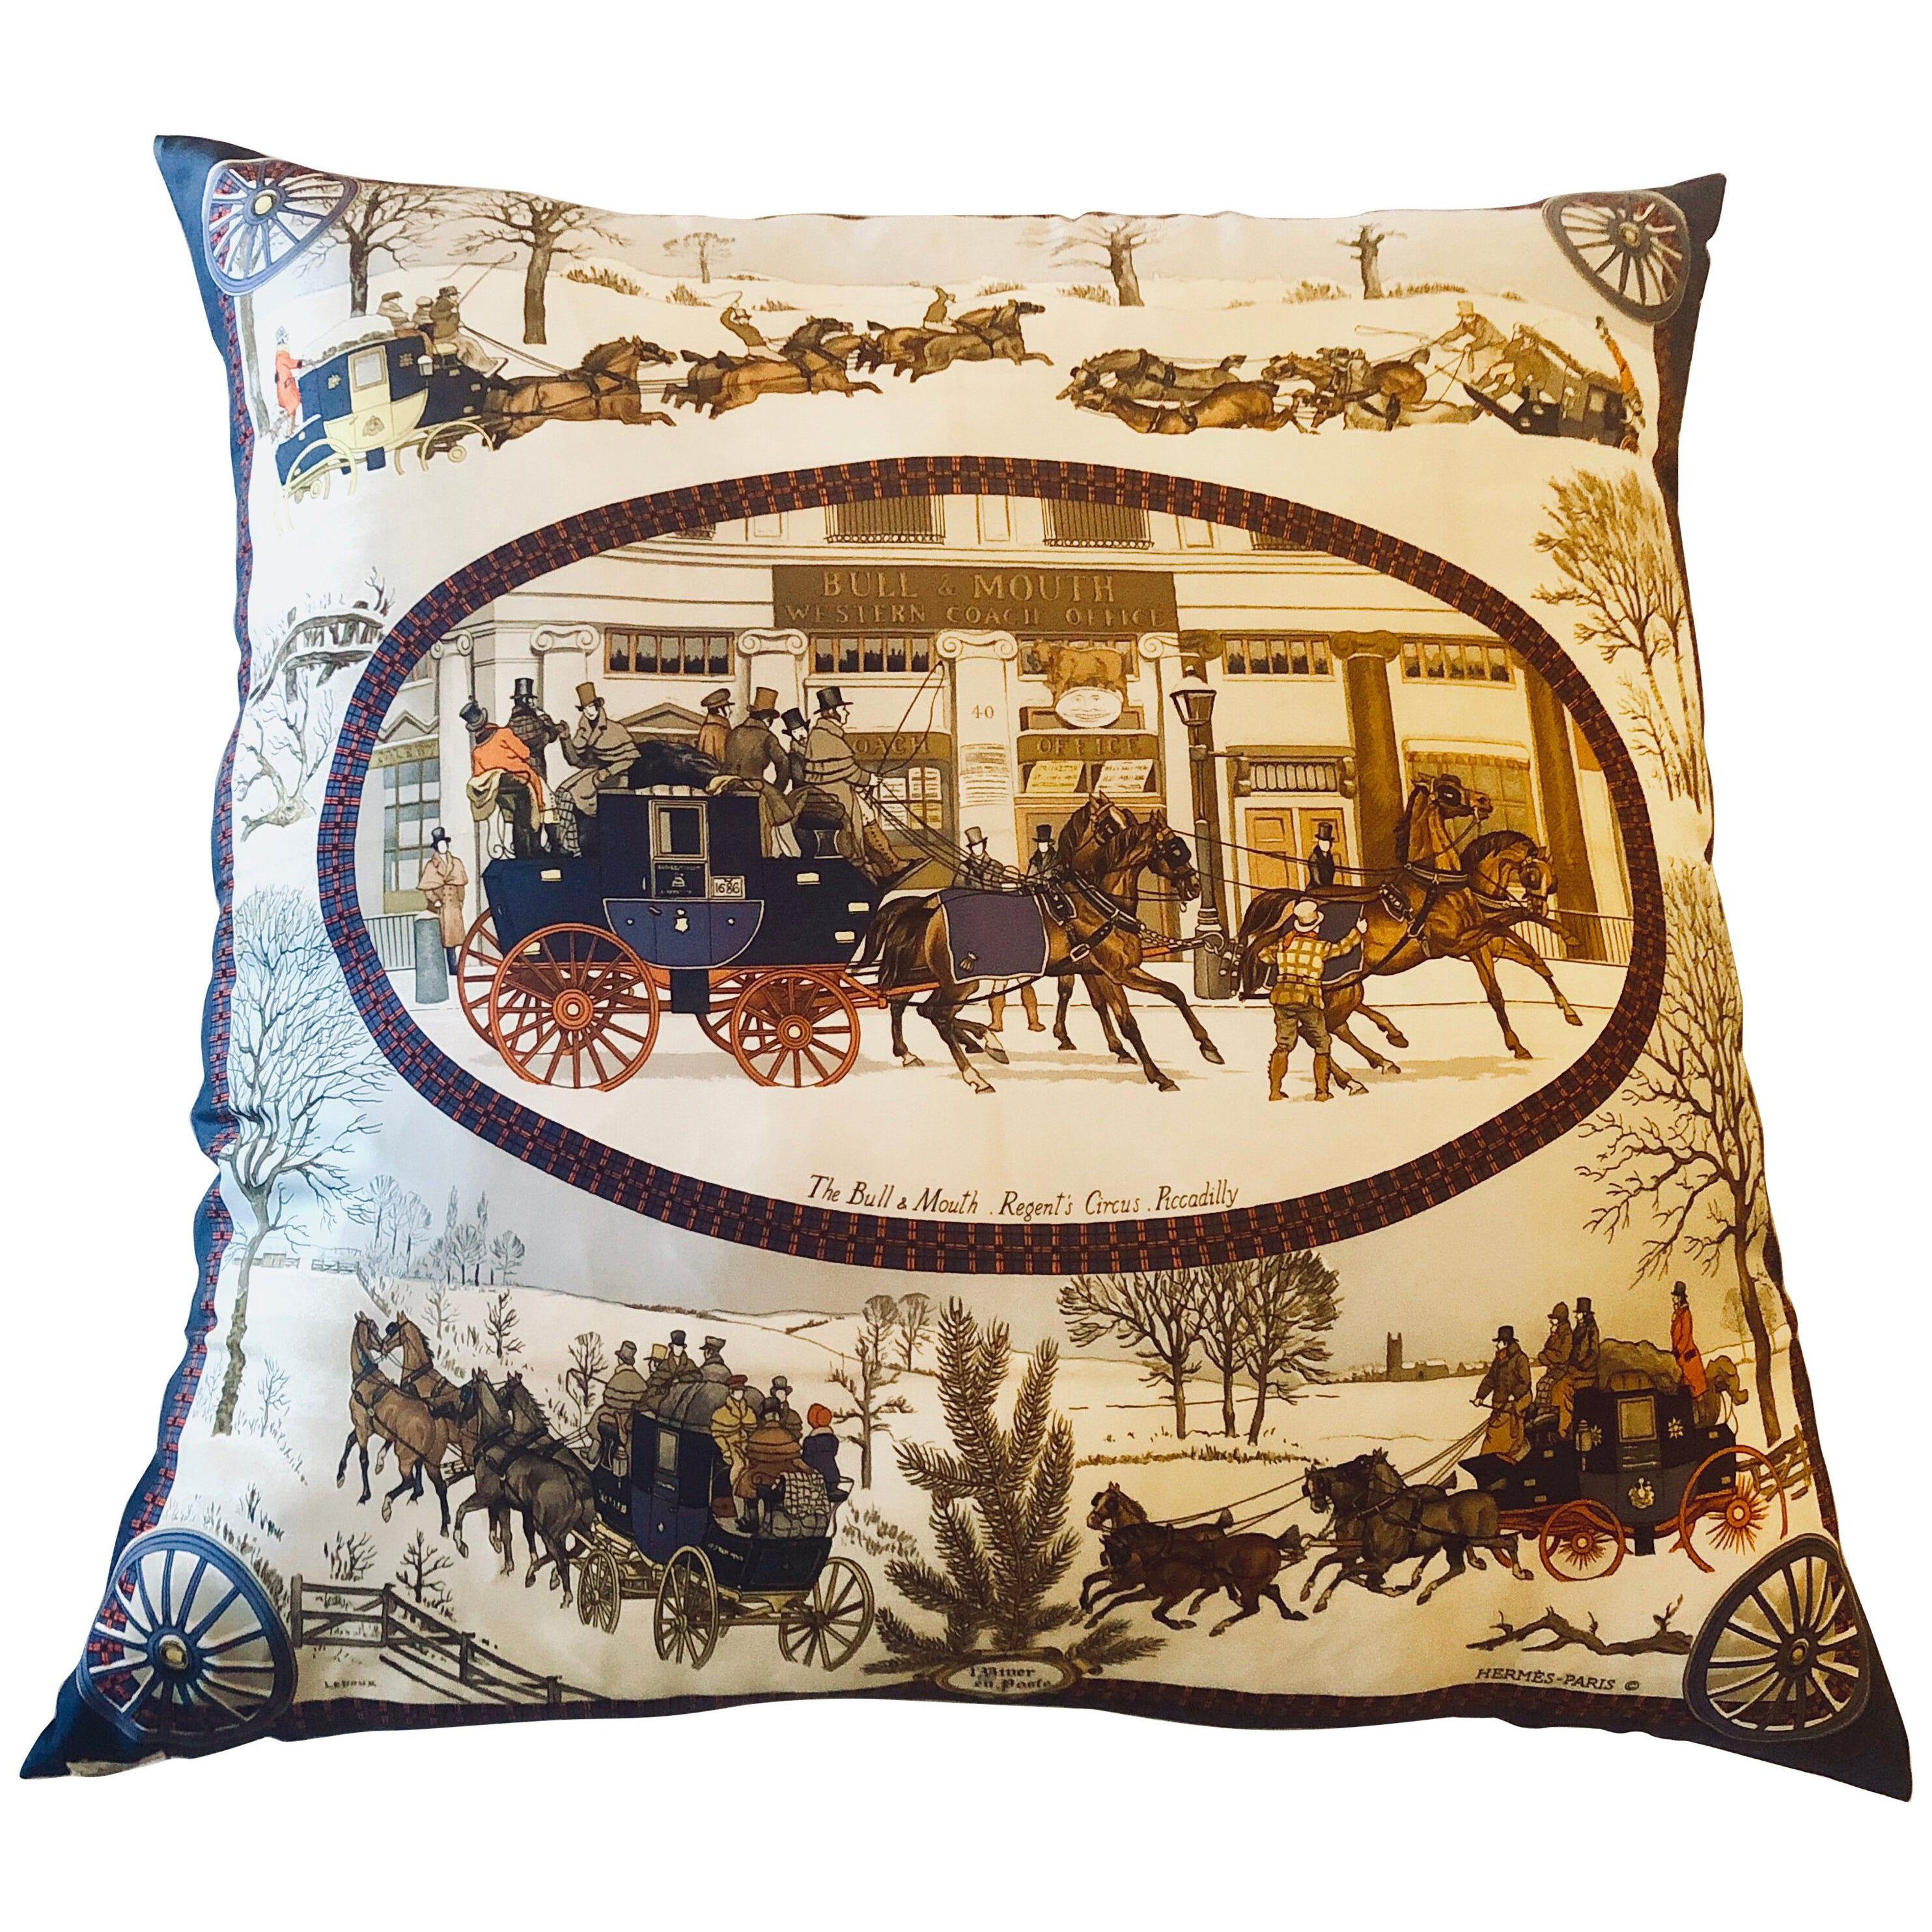 Hollywood Regency Style Hermes 'The Bull and Mouth Regents Circus' Silk Pillow